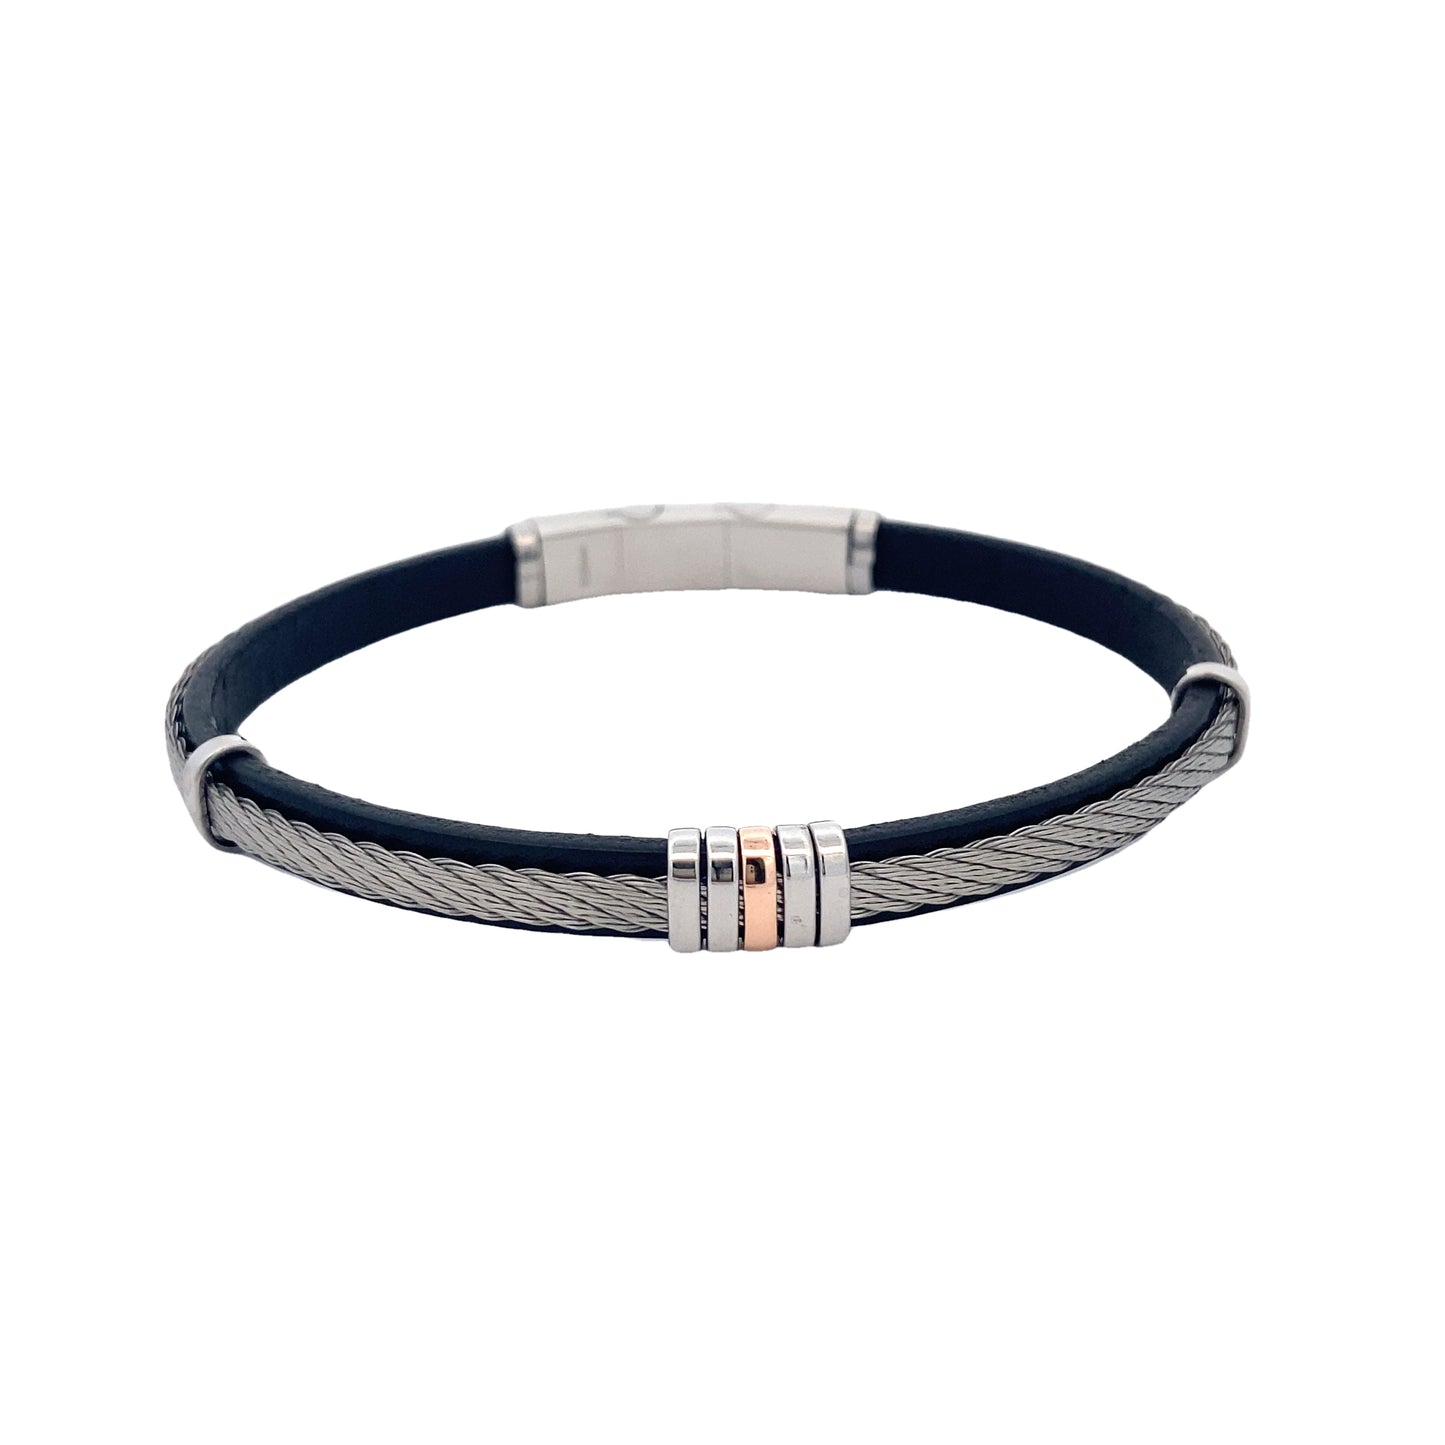 Hector by Marcello Pane Men Bracelet | Hector by Marcello Pane | Luby 